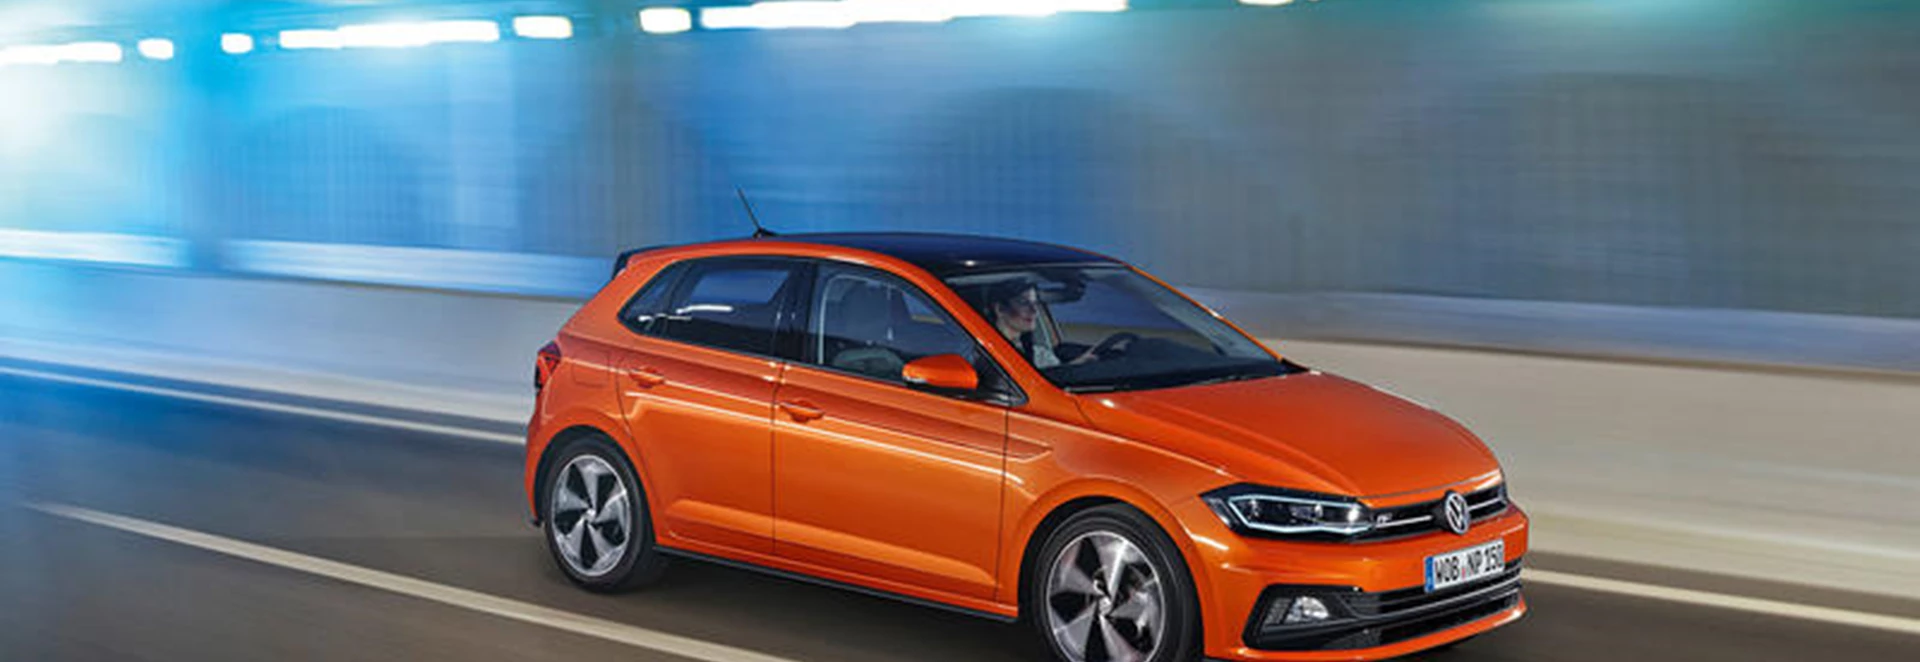 2018 Volkswagen Polo is bigger and posher